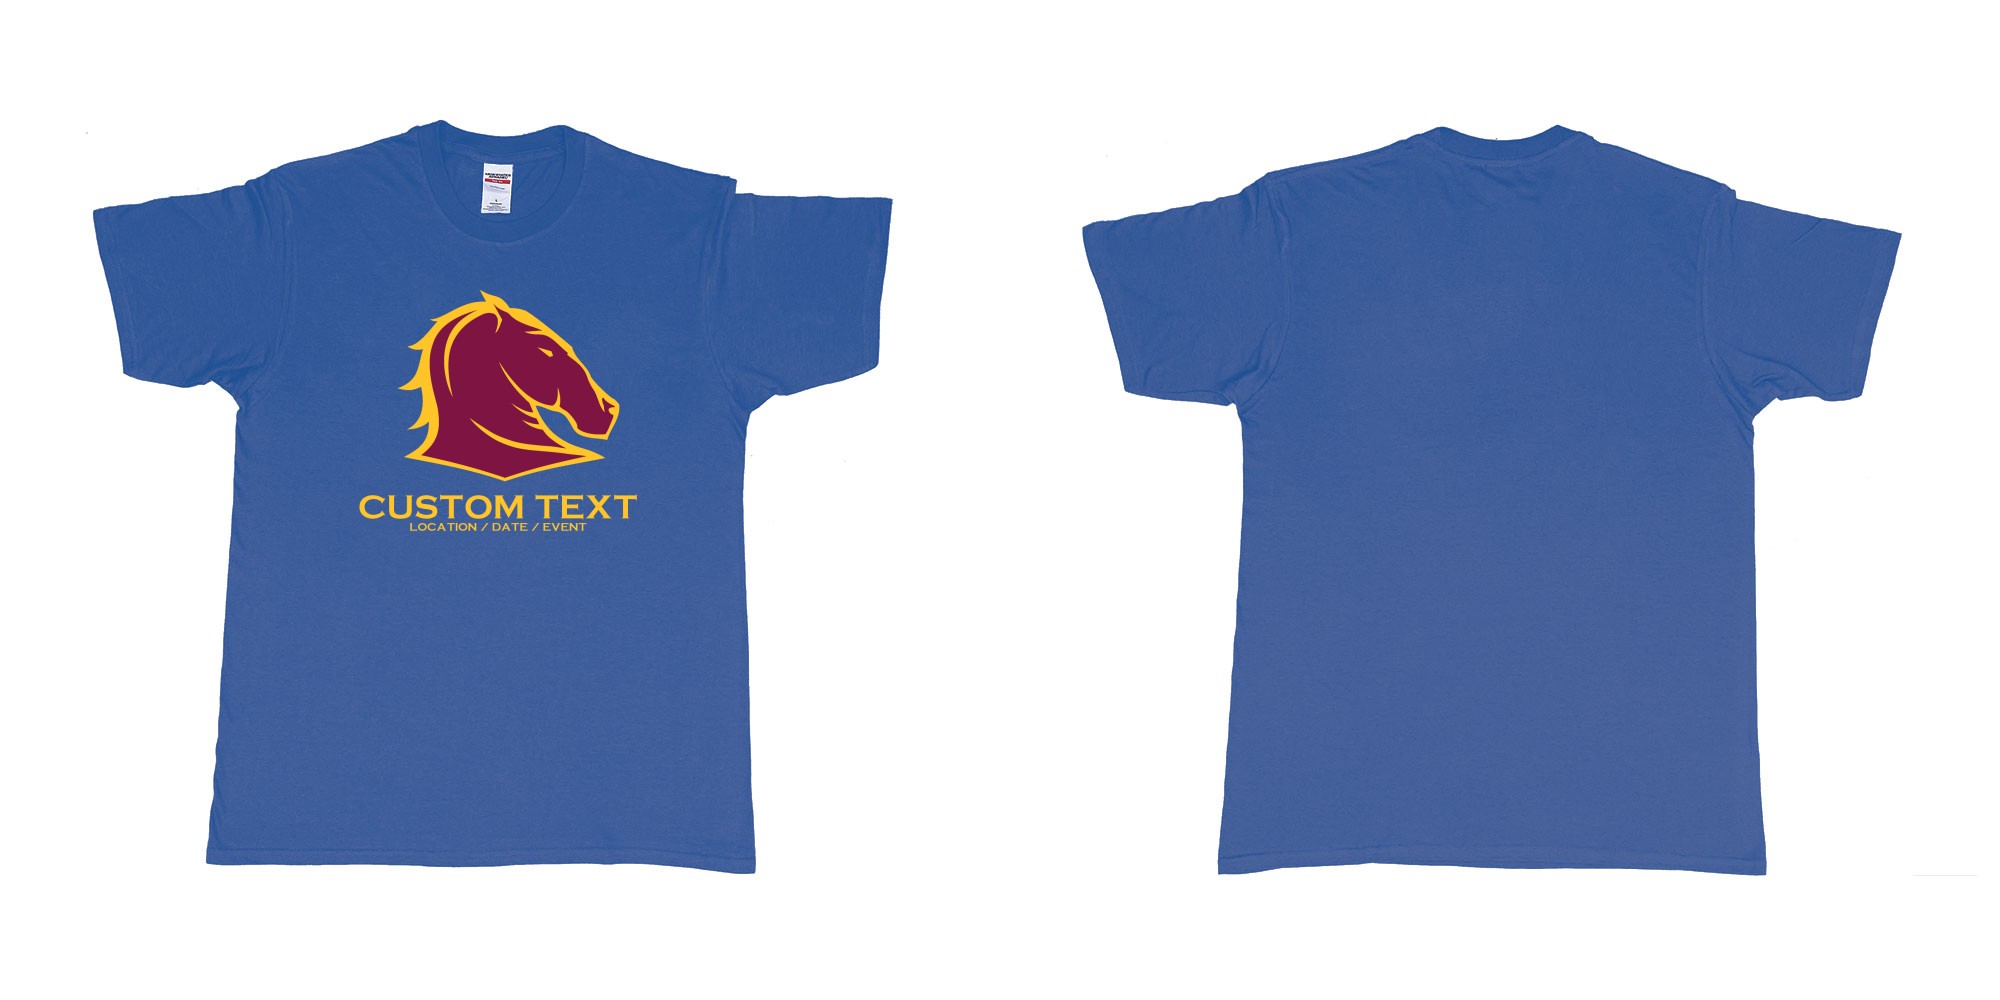 Custom tshirt design brisbane broncos australian professional rugby league football club queensland in fabric color royal-blue choice your own text made in Bali by The Pirate Way